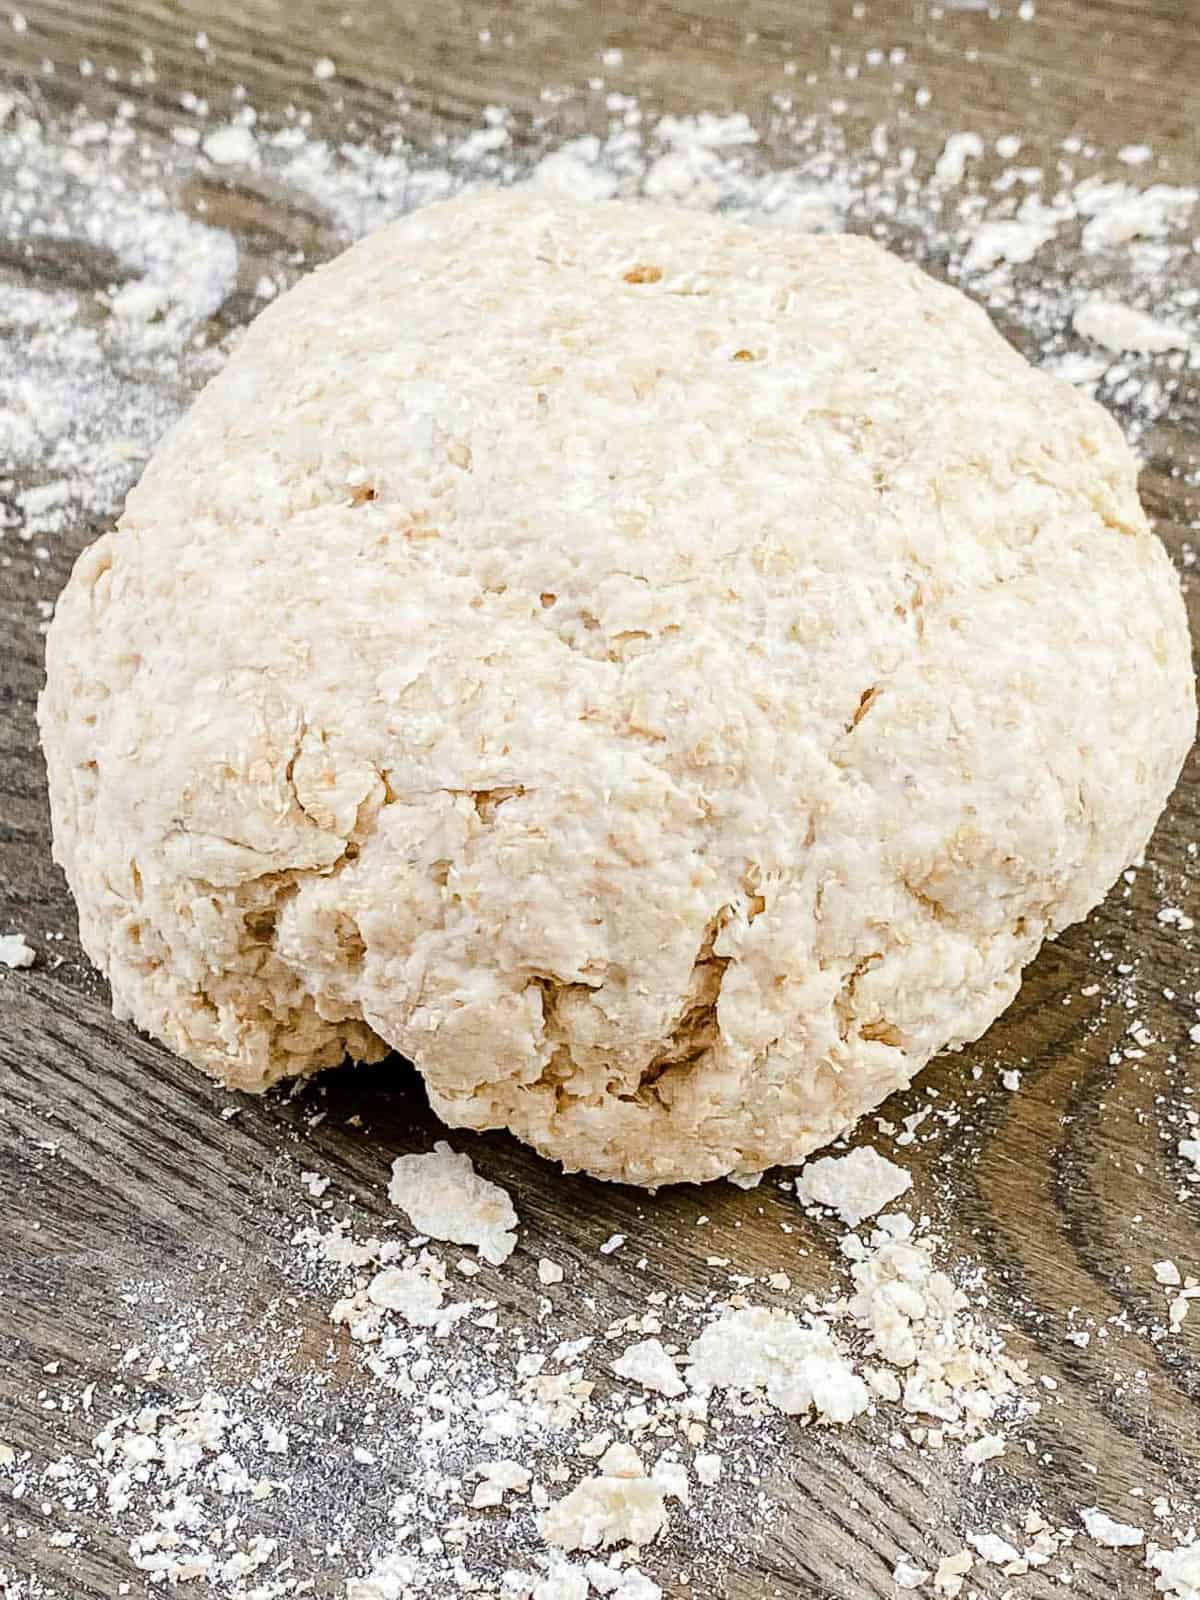 Kneaded dough formed in a round dough ball for low-calorie pizza crust.